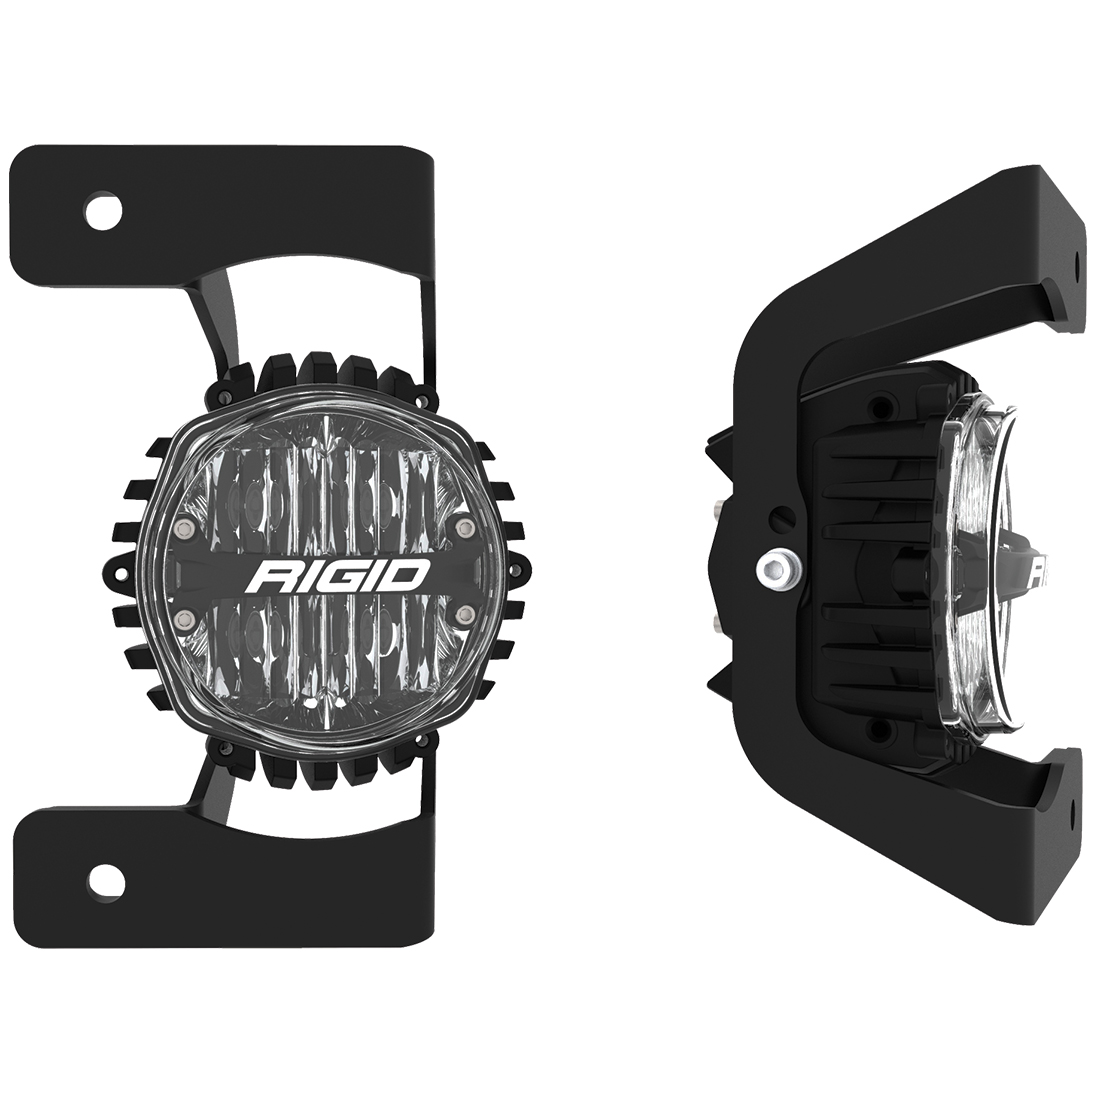 Rigid Industries Toyota Fog Mount Bracket For 14-20 Tundra/4Runner 16-20 Tacoma - Click Image to Close